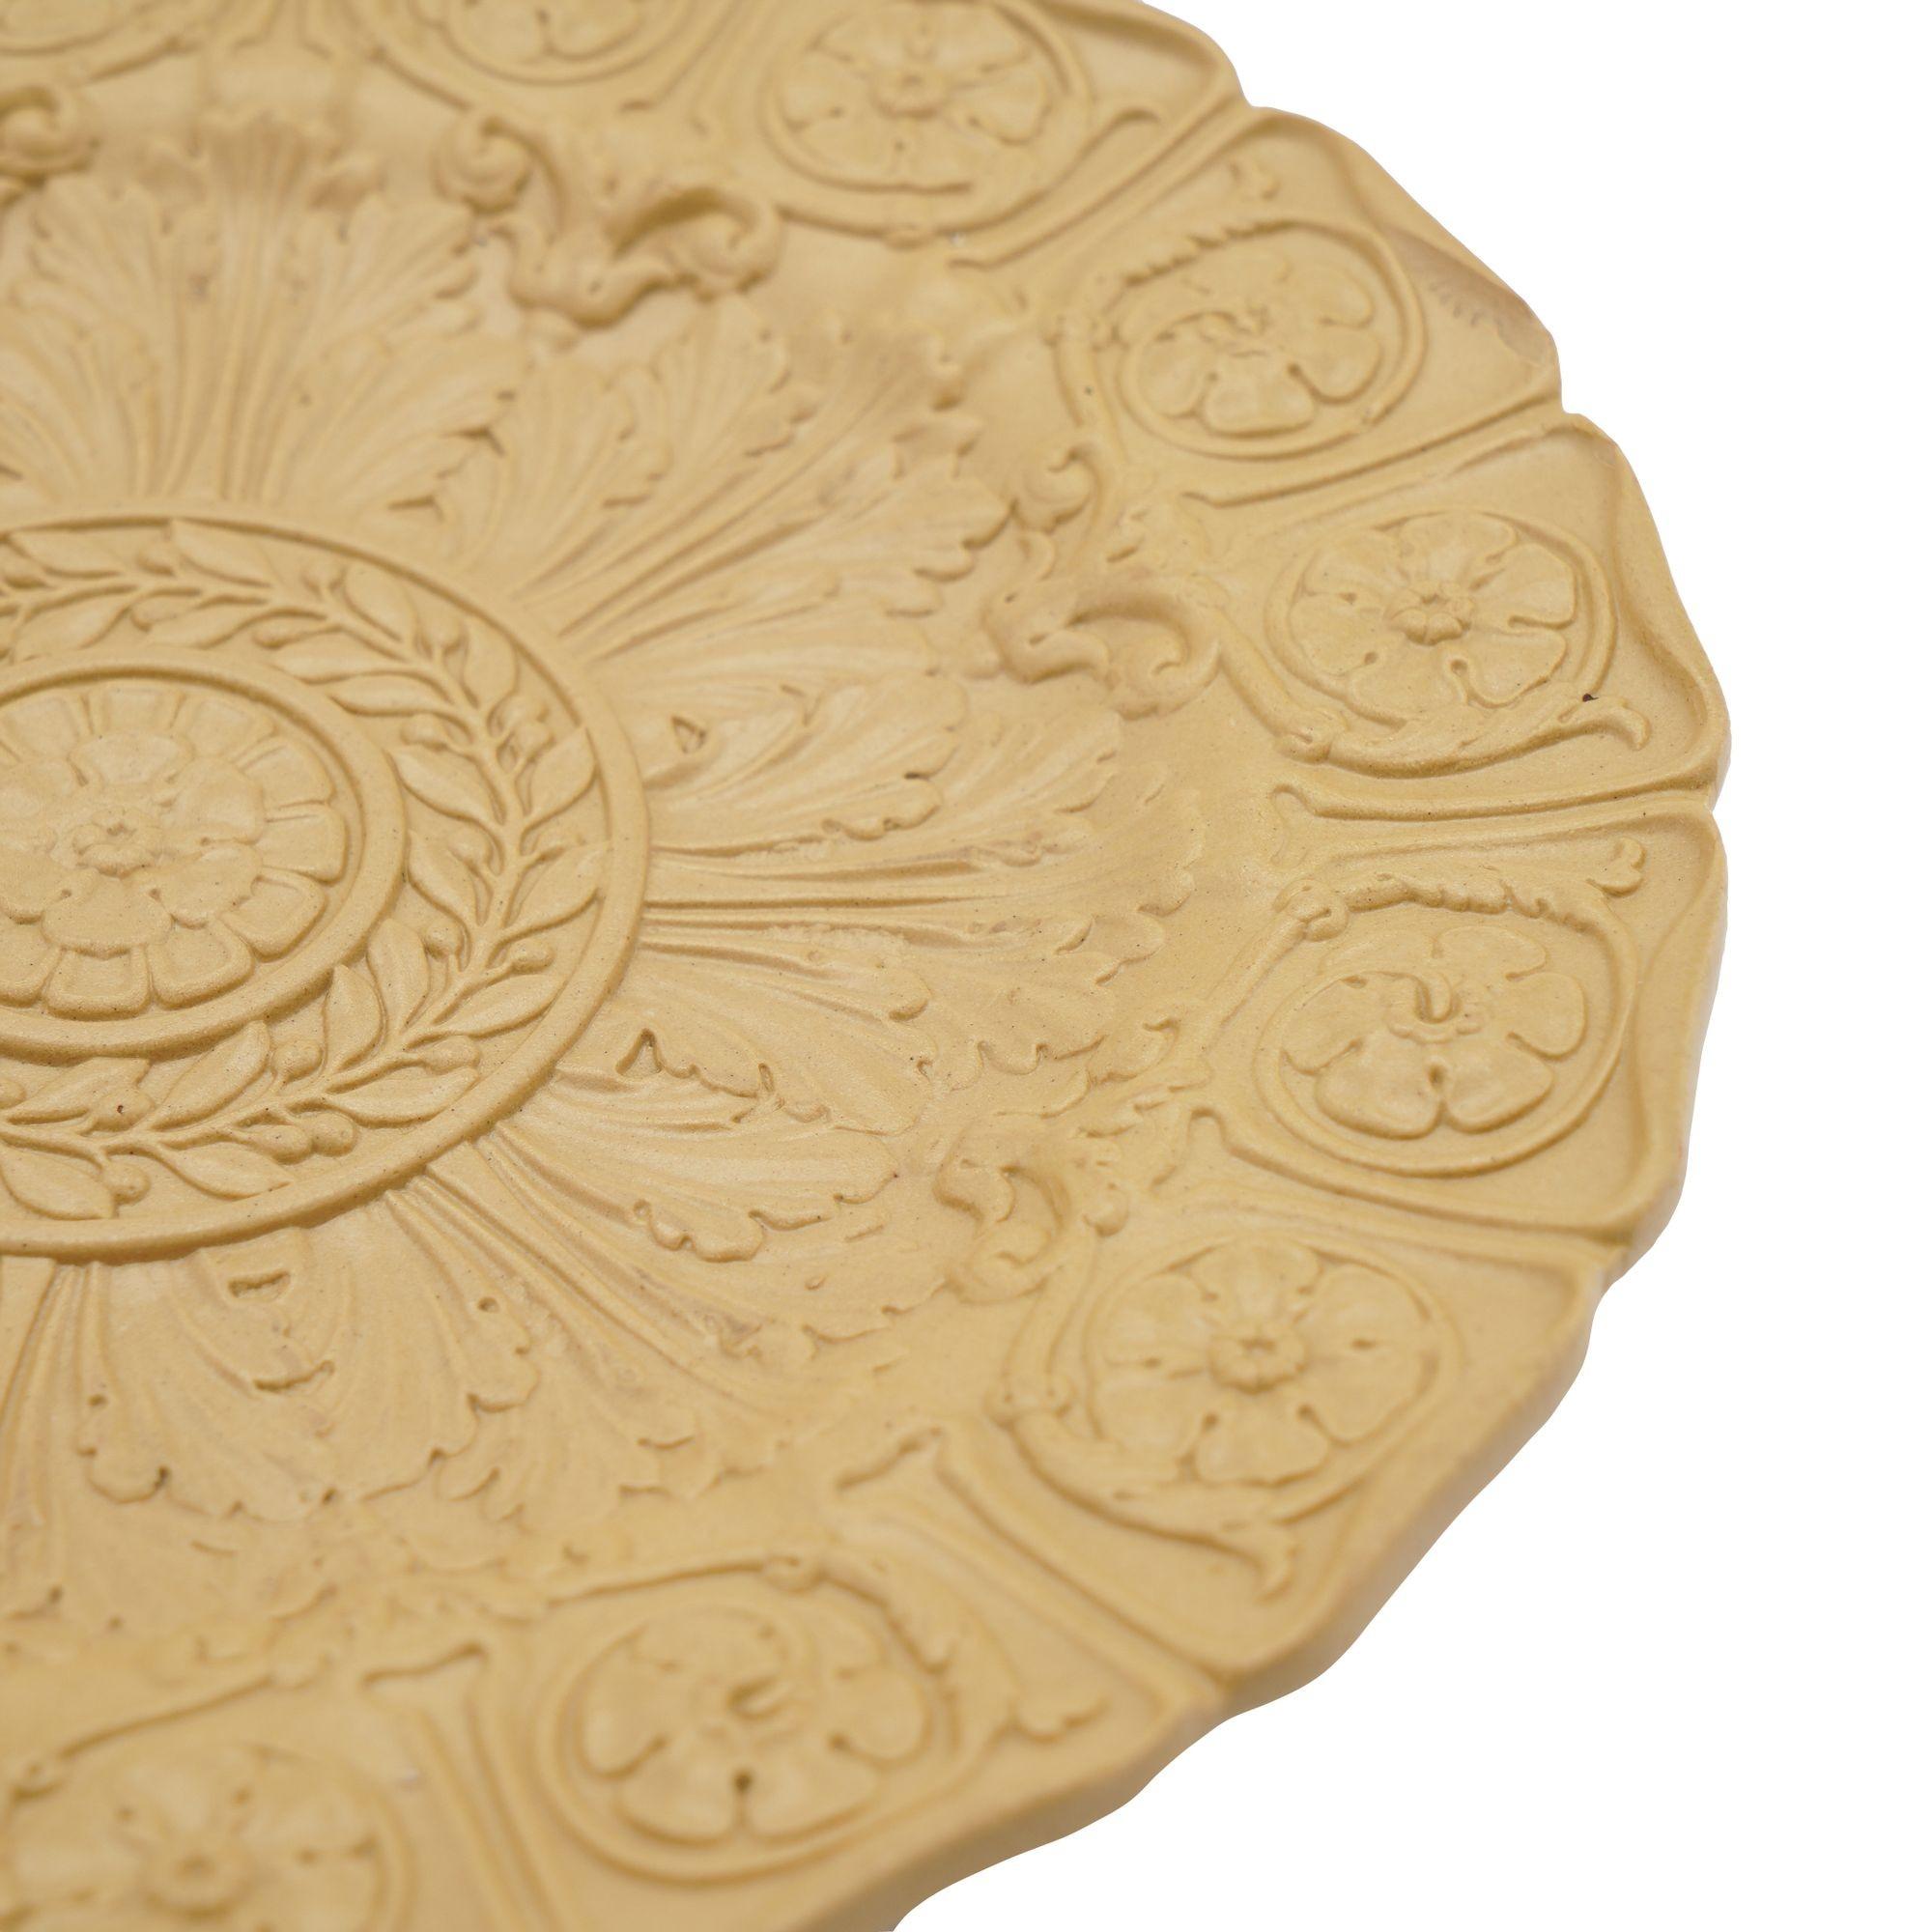 Putty colored stoneware plate with fine smear glaze. The impressed surface decoration centers on a Tudor rose with laurel leaf circlet, radiating acanthus leaves, and 16 compartmentalized scrolls, each featuring a single Tudor rose. The reverse is